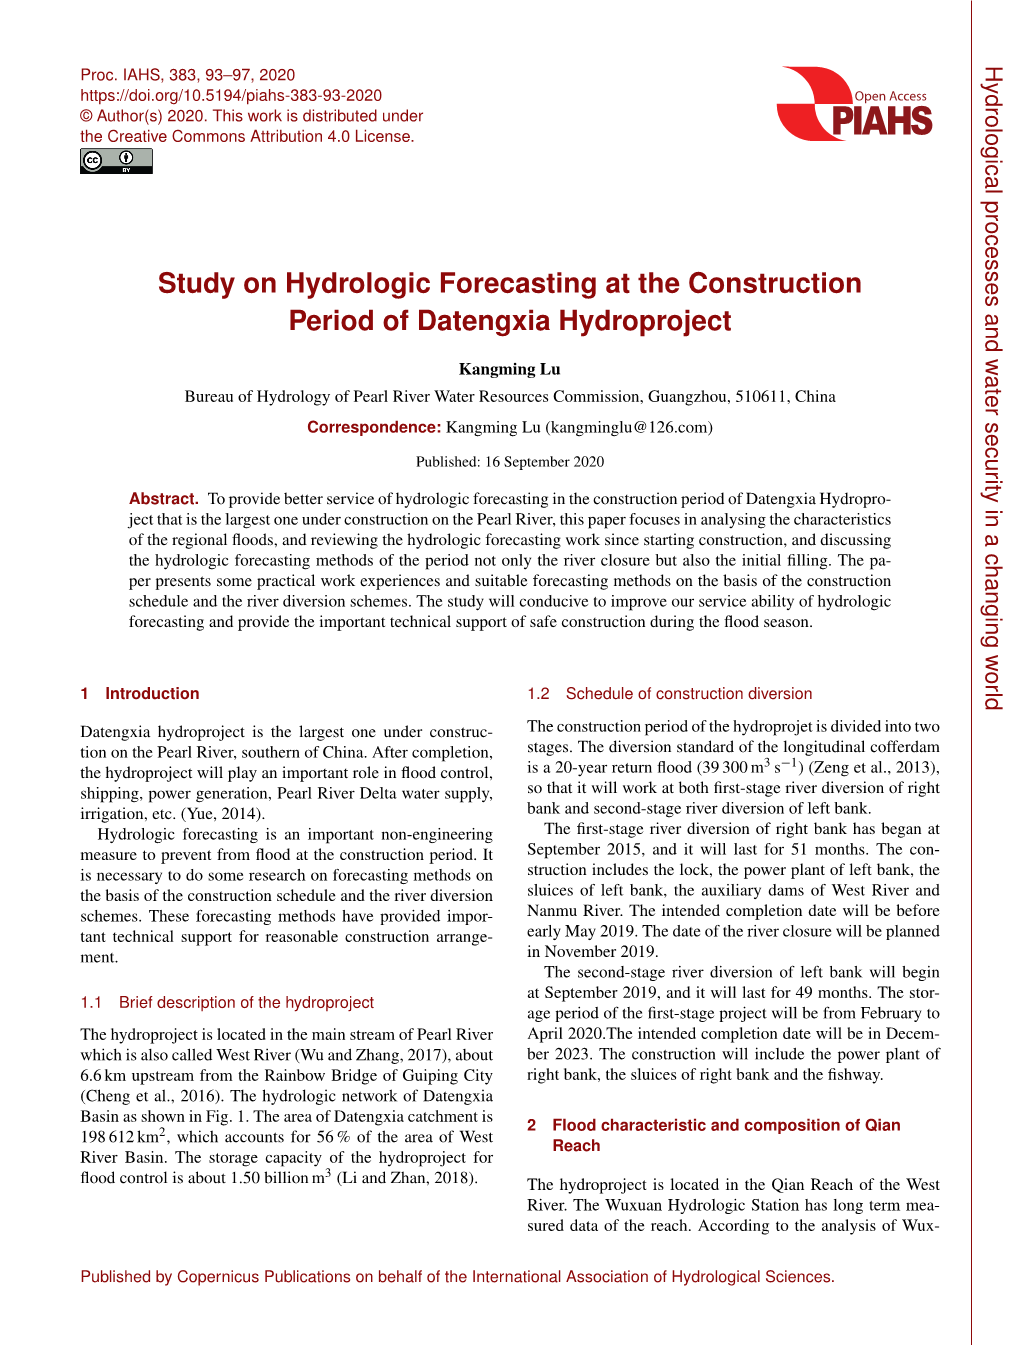 Study on Hydrologic Forecasting at the Construction Period of Datengxia Hydroproject